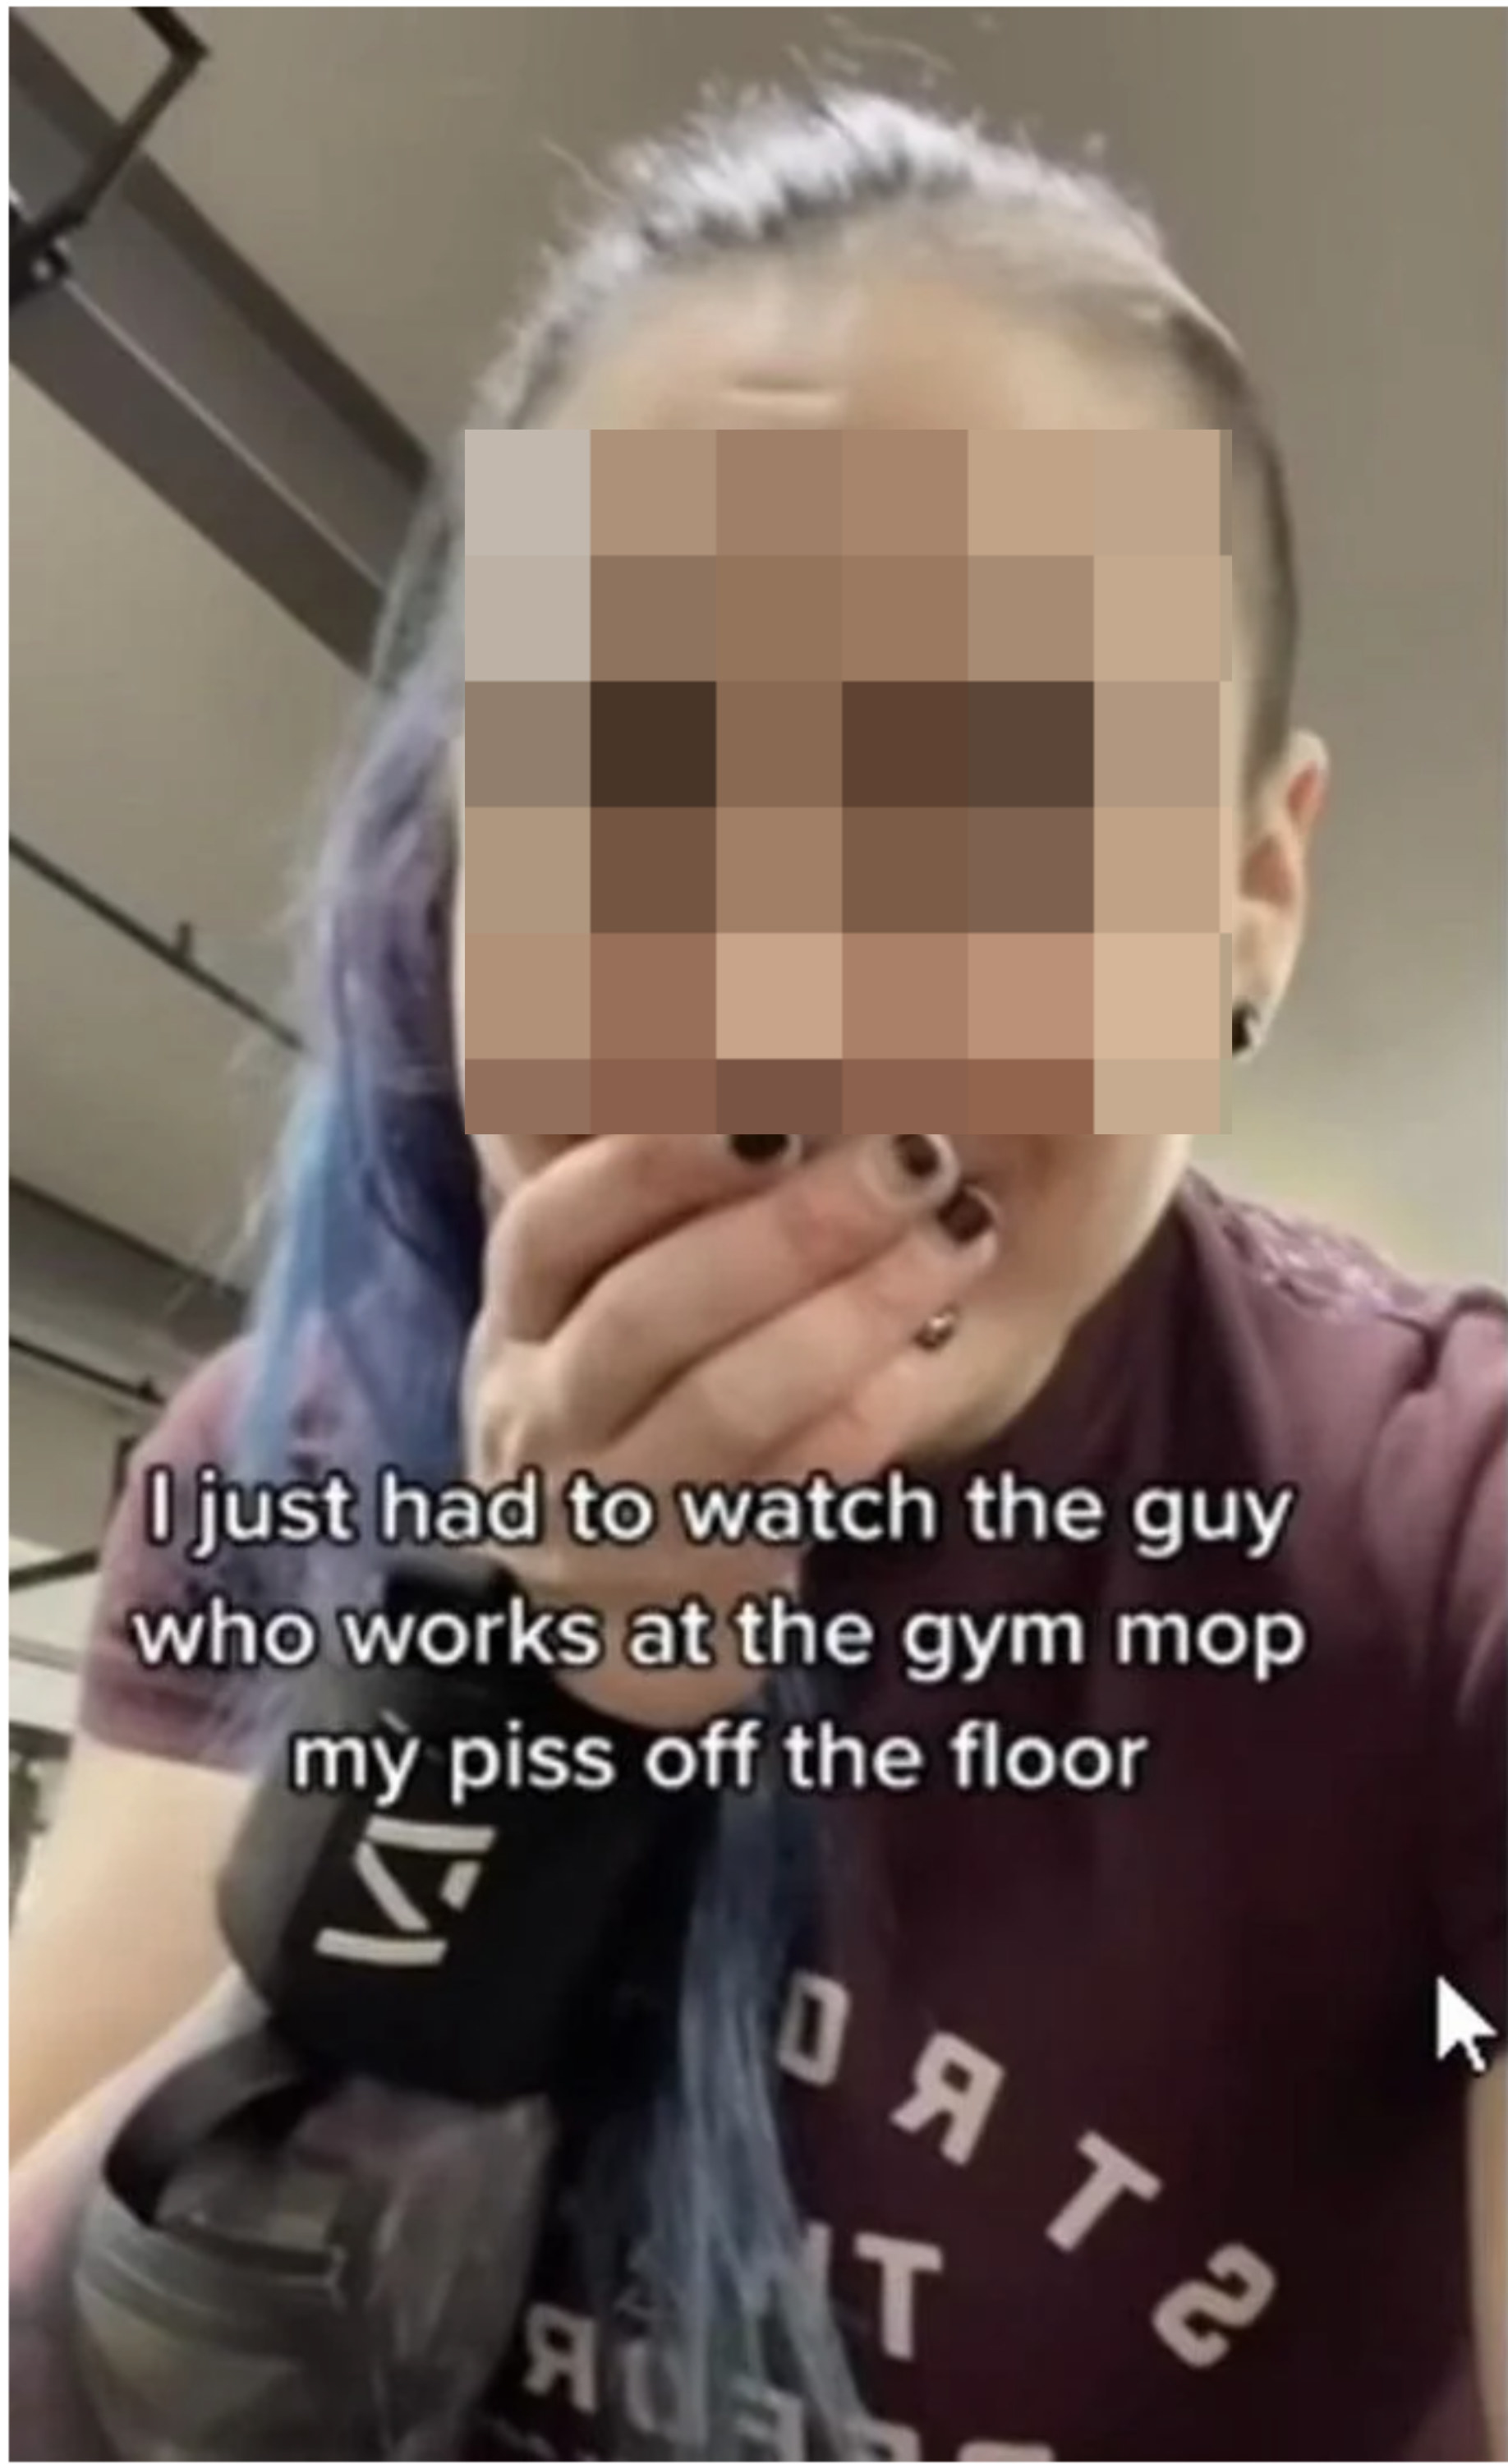 &quot;I just had to watch the guy who works at the gym mop my piss off the floor&quot;